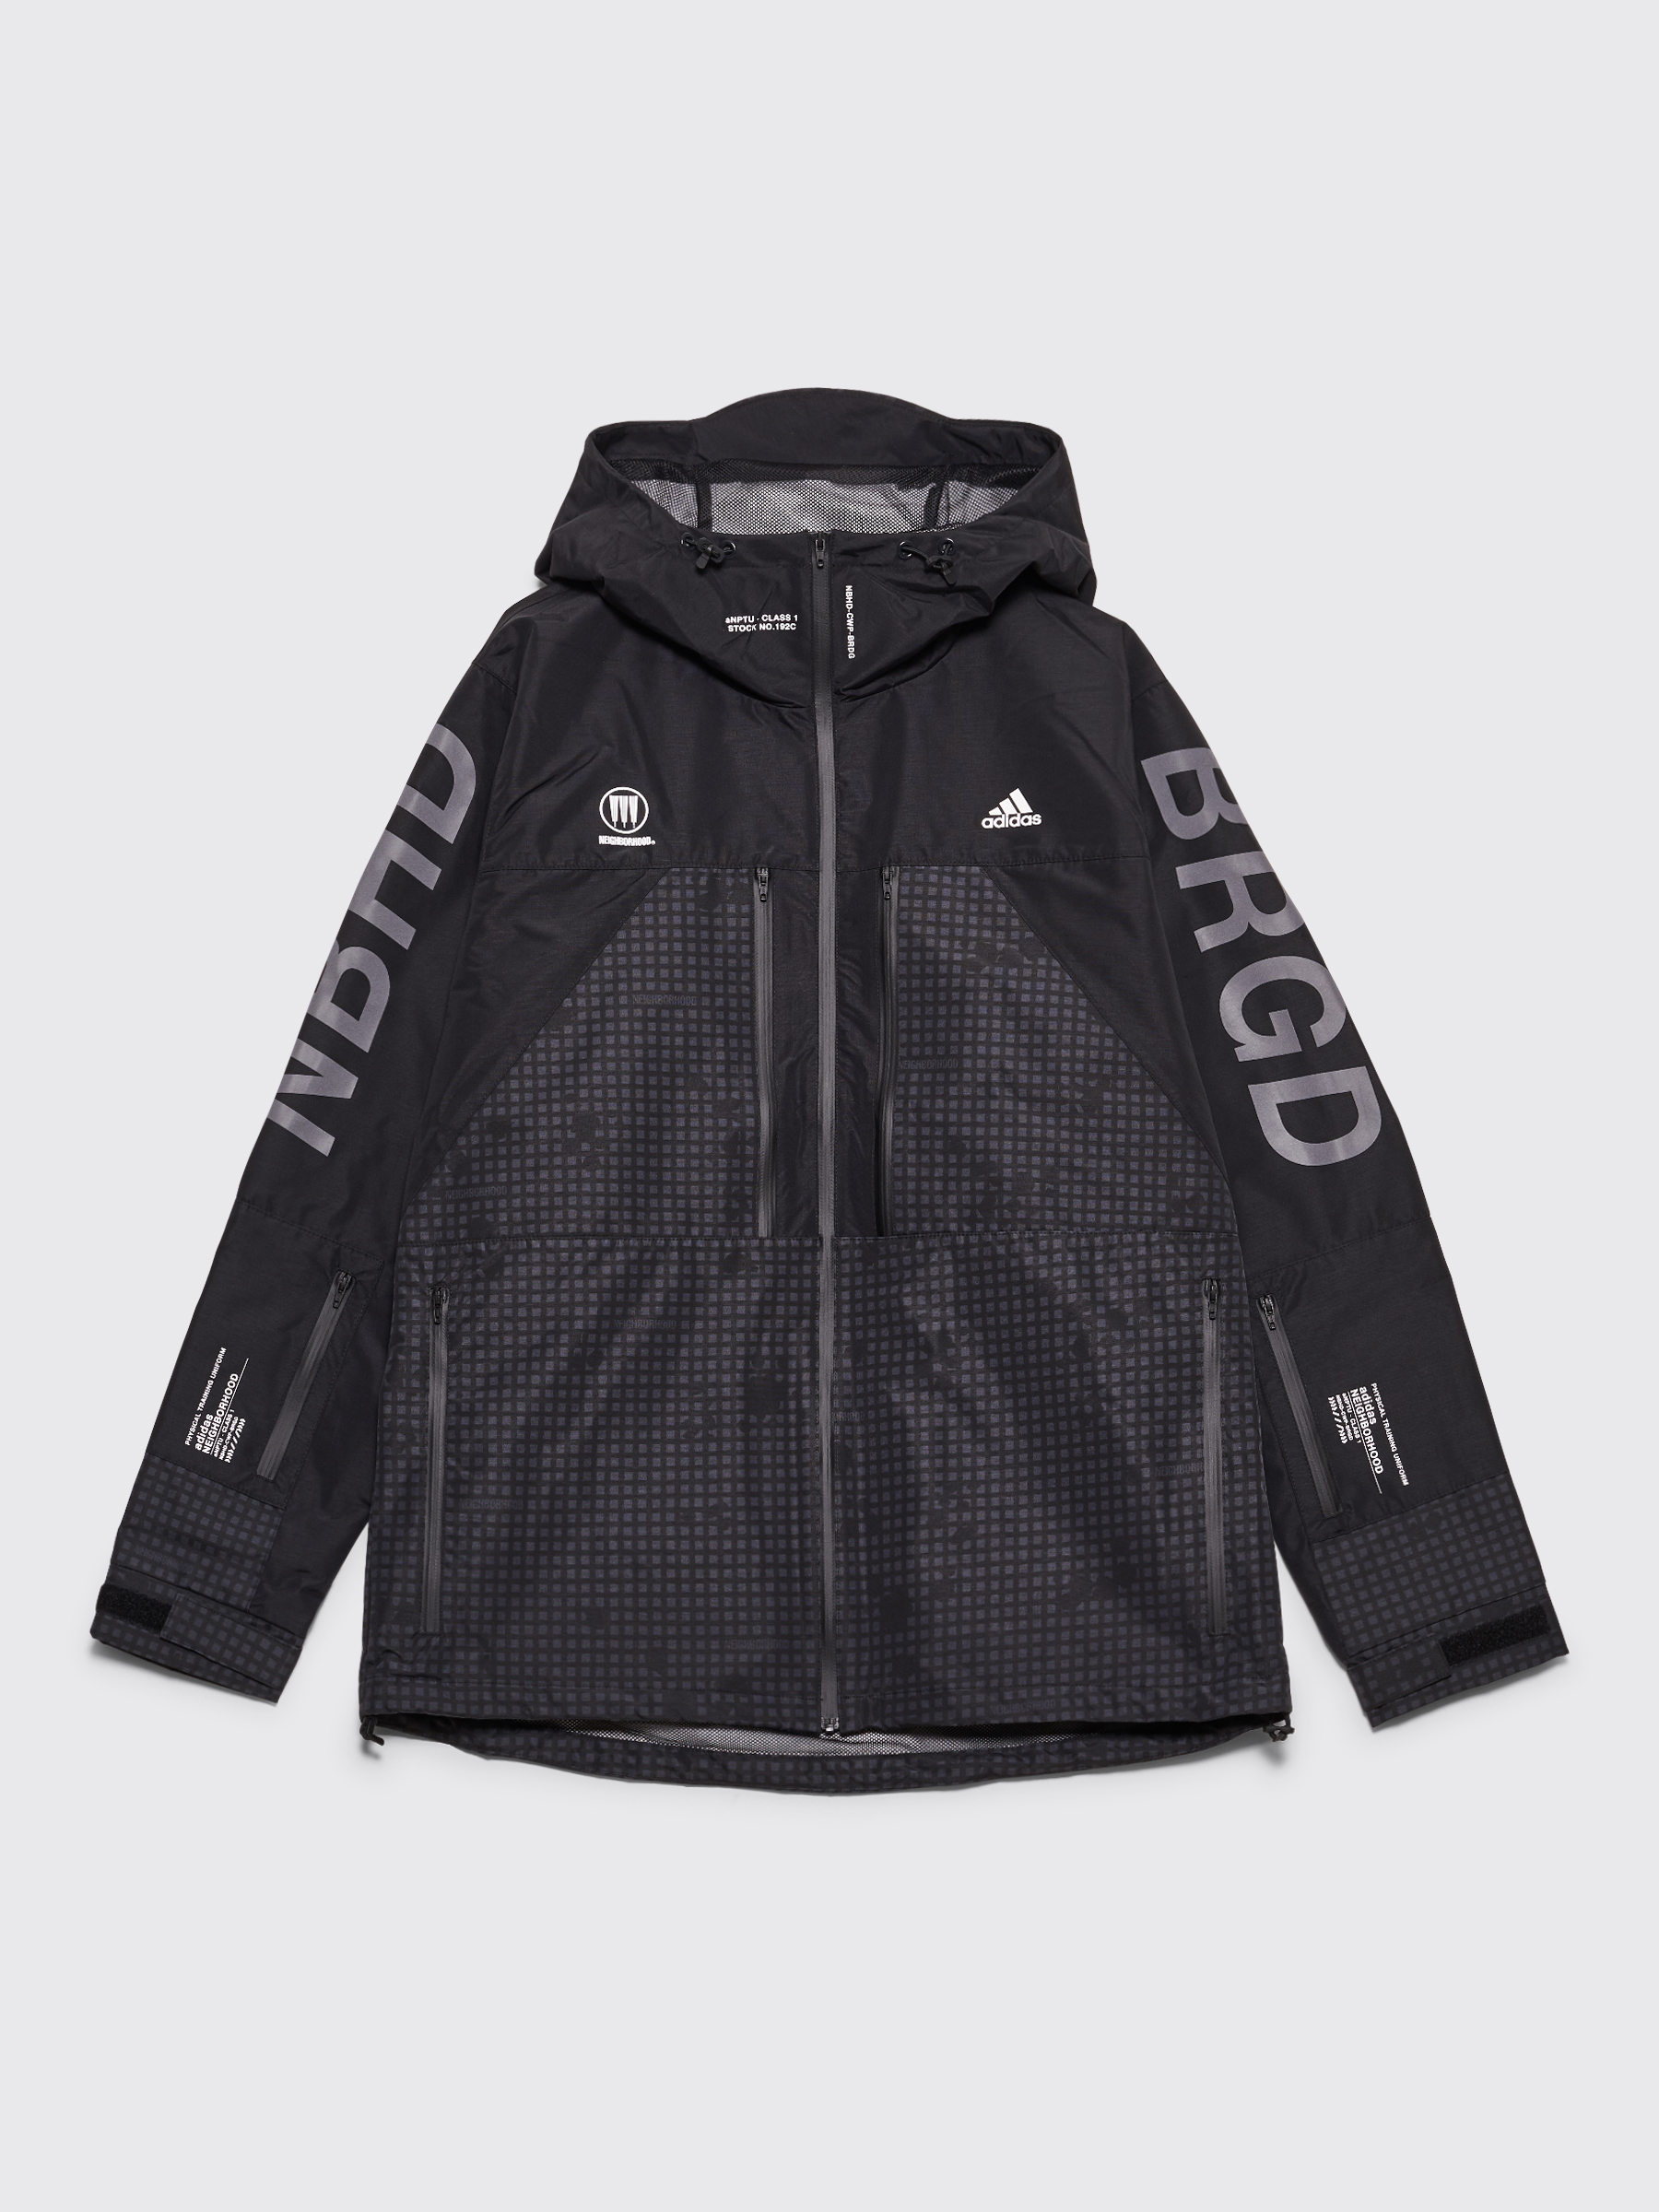 adidas jackets for sale in india